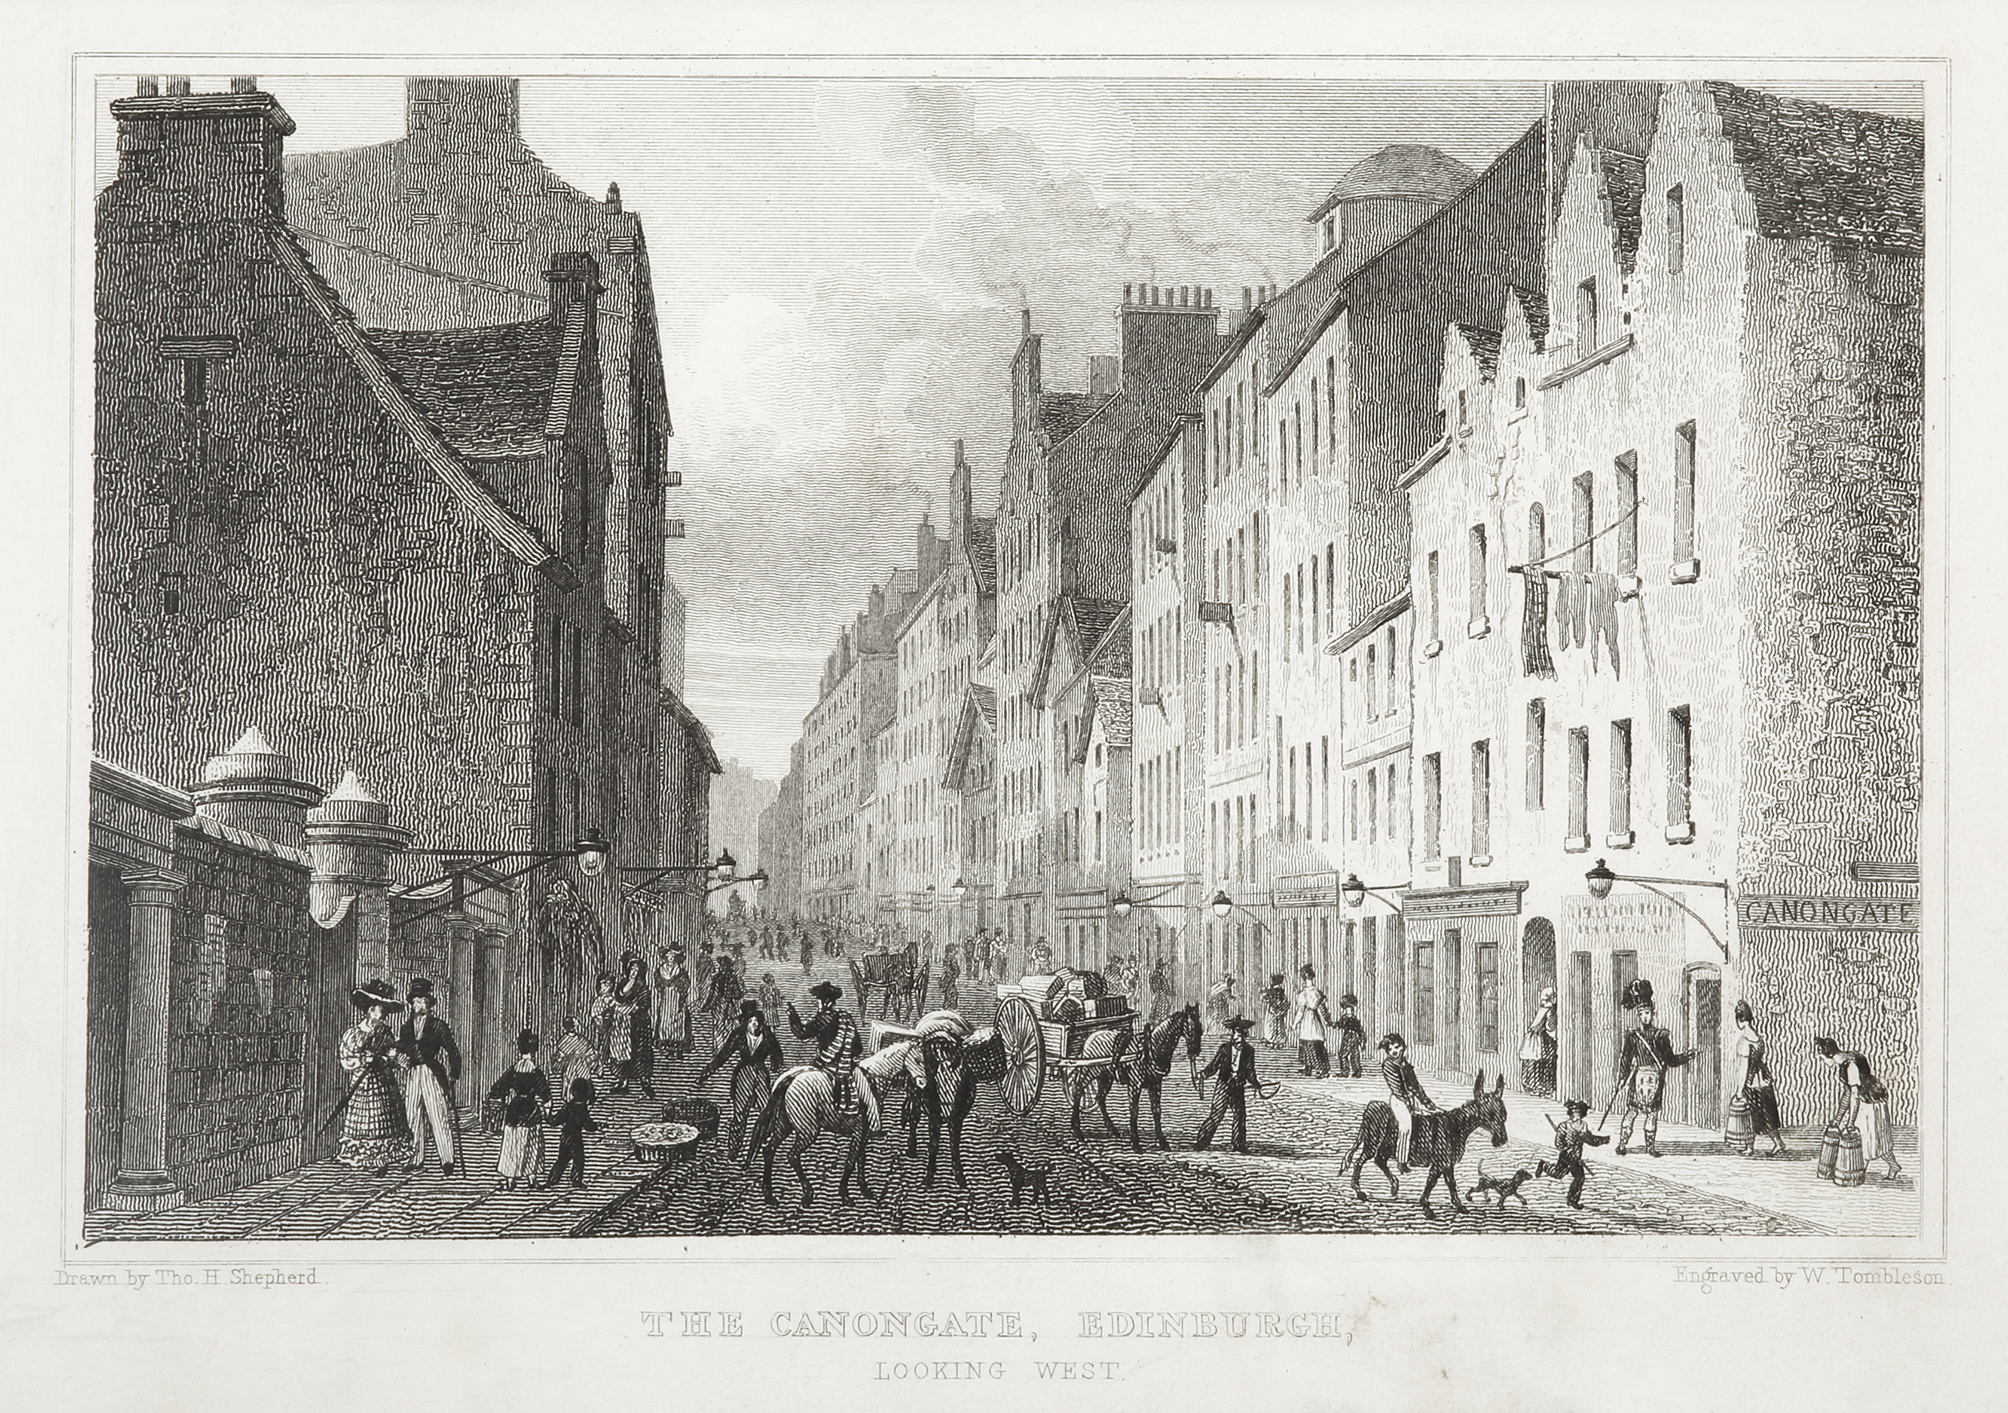 The Canongate, Edinburgh, Looking West. - Antique Print from 1829